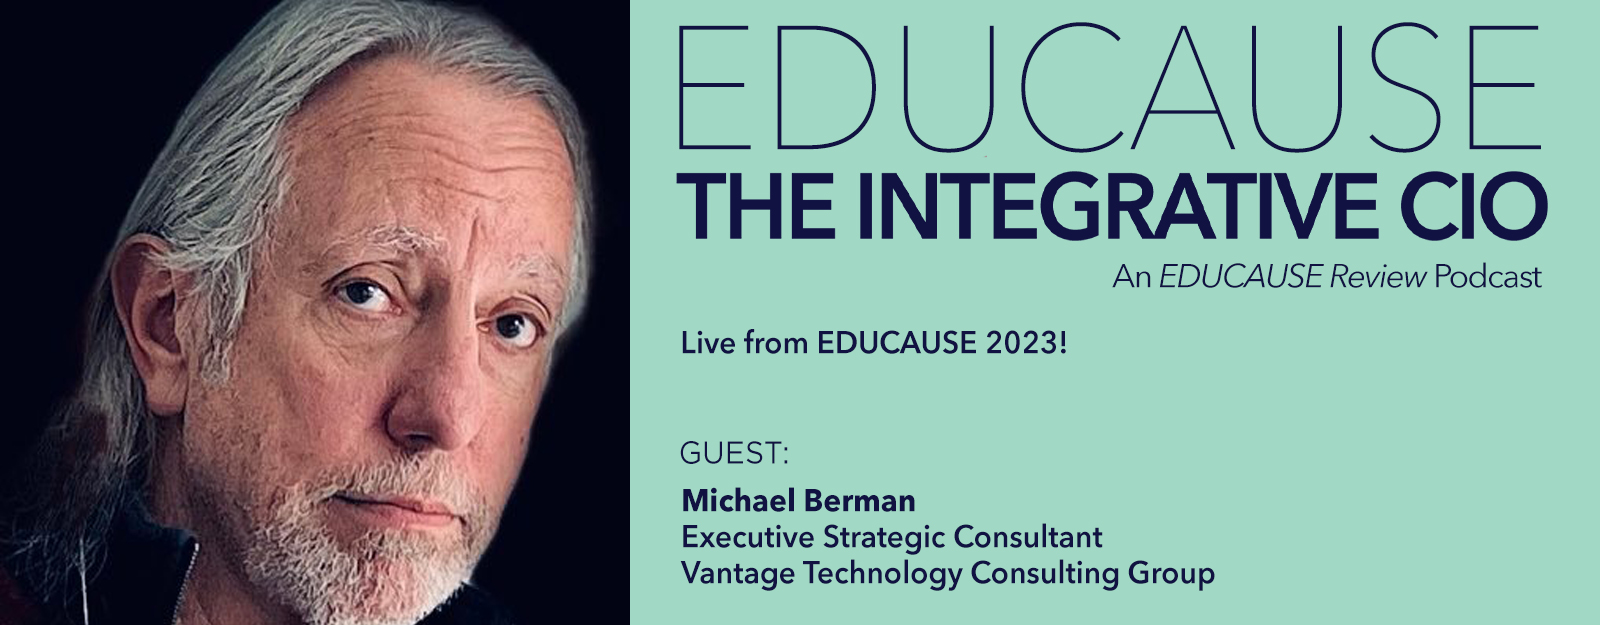 Michael Berman on Meeting Today's Higher Ed Challenges